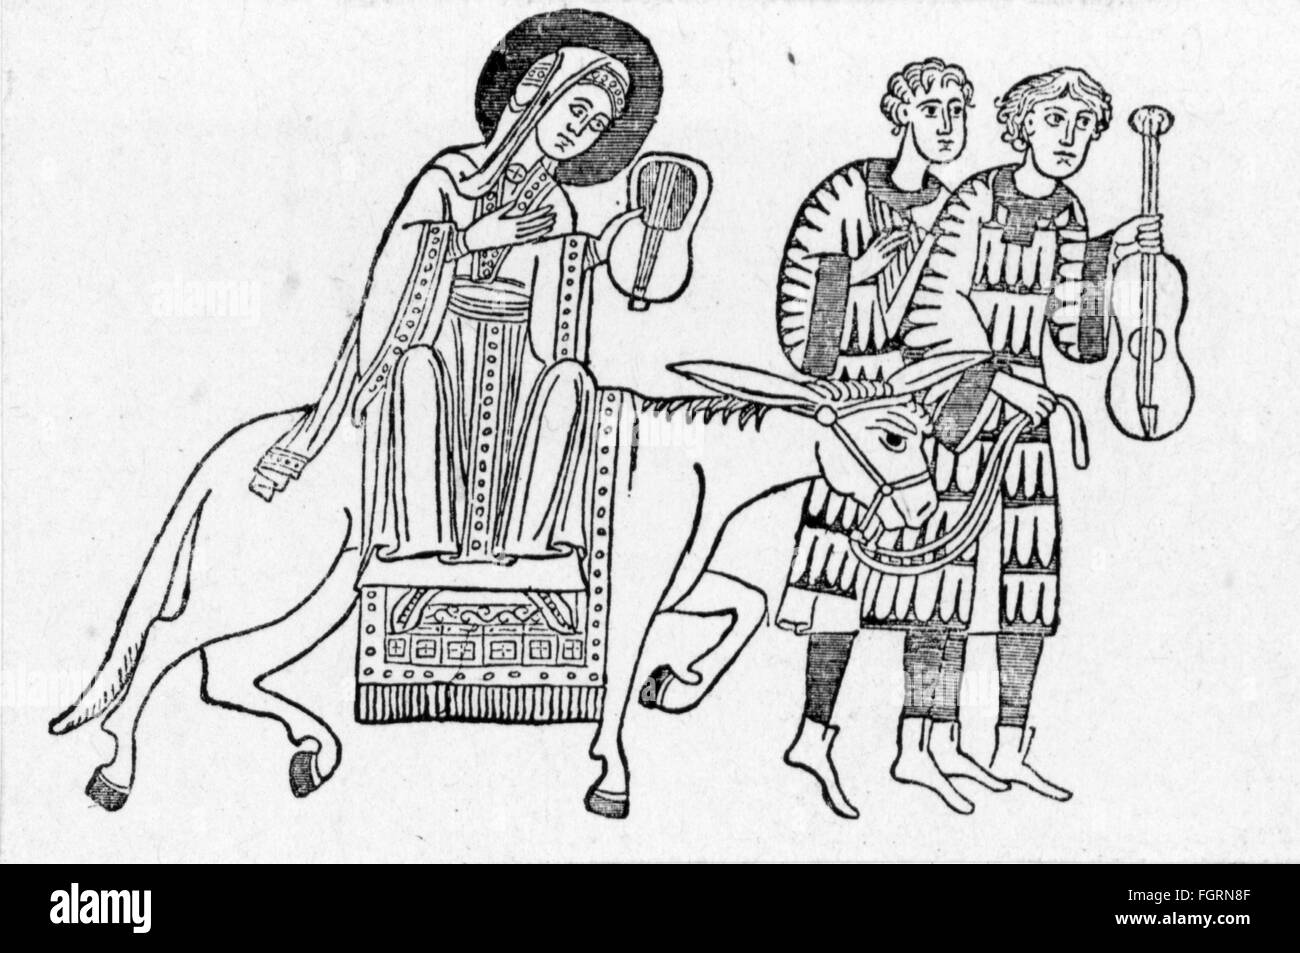 music, musician, bandsmen, King David leader of the chorus, after miniature, psaltery, 11th century, wood engraving, 19th century, animals, animal, donkey, donkeys, riding, musical instrument, instrument, musical instruments, instruments, aulos, Judaism, the Jews, Jewry, Jewishness, Jew, Jews, David, biblical scene, biblical scenes, biblical story, biblical stories, Old Testament, Middle Ages, Romanesque, people, group, groups, roamer, rover, roamers, rovers, bandsman, bandsmen, miniature, miniatures, psaltery, psaltry, historic, historical, Additional-Rights-Clearences-Not Available Stock Photo